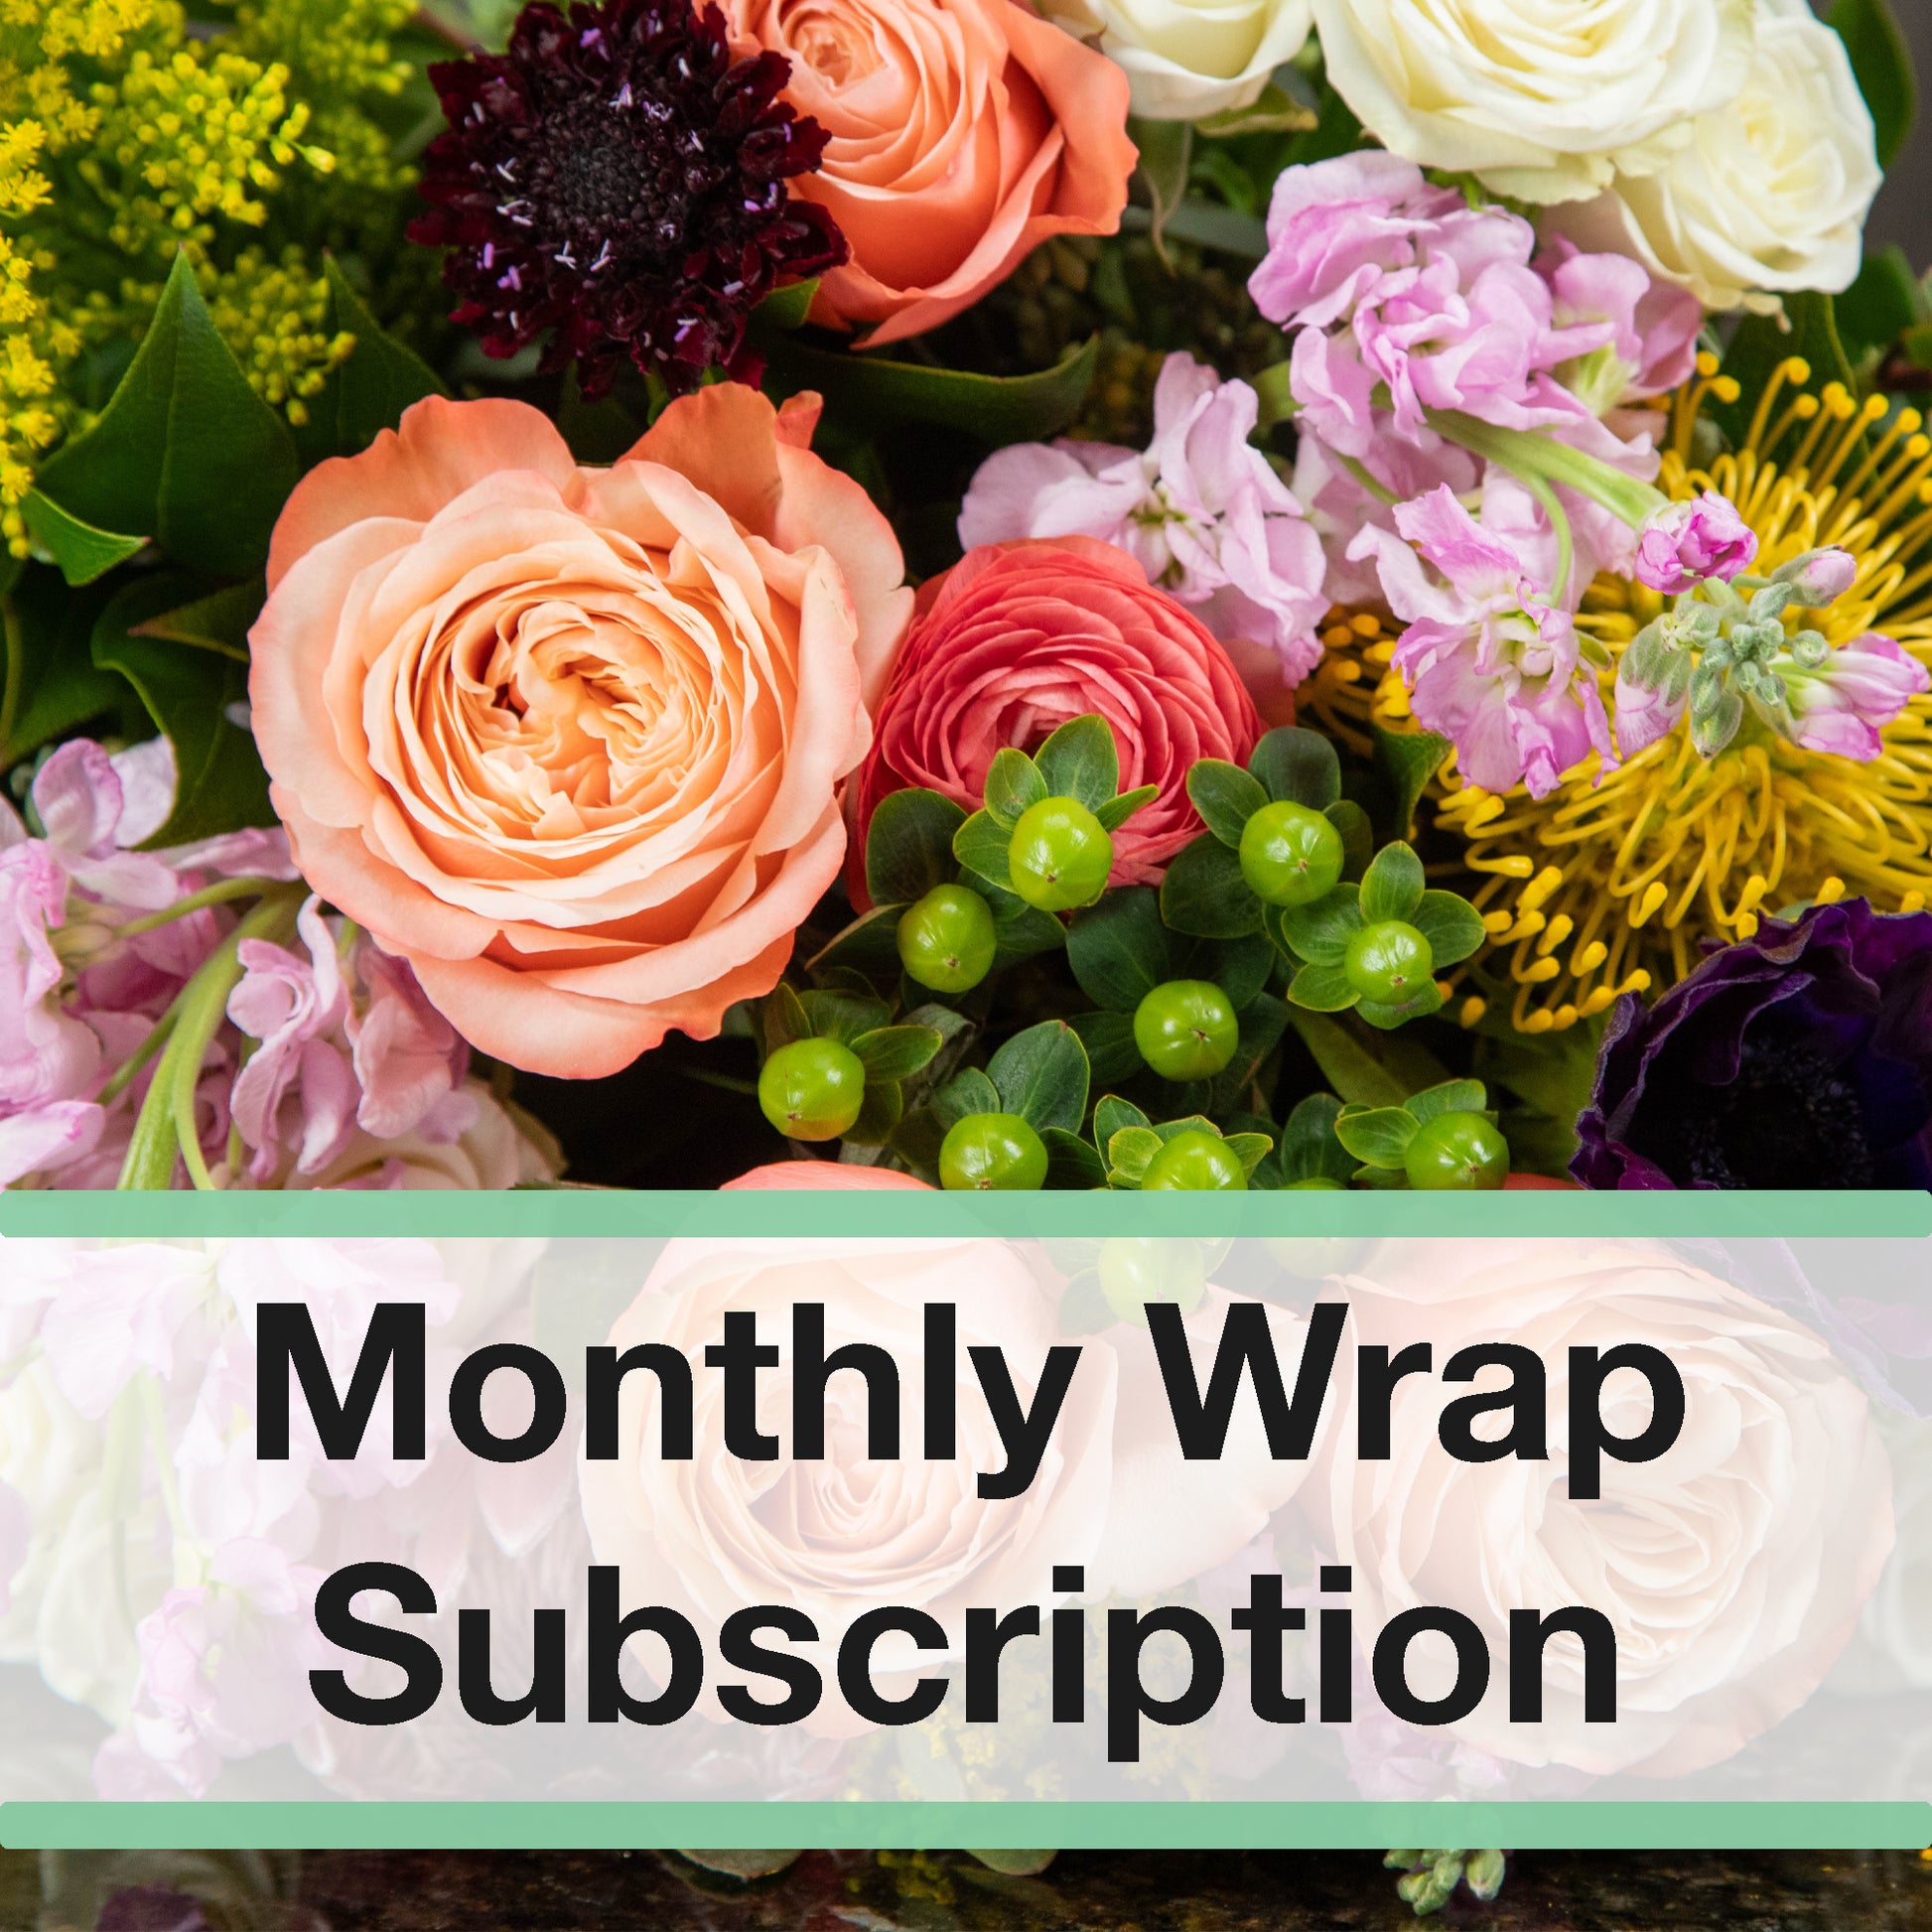 "monthly wrap subscription" written below a variety of colorful flowers